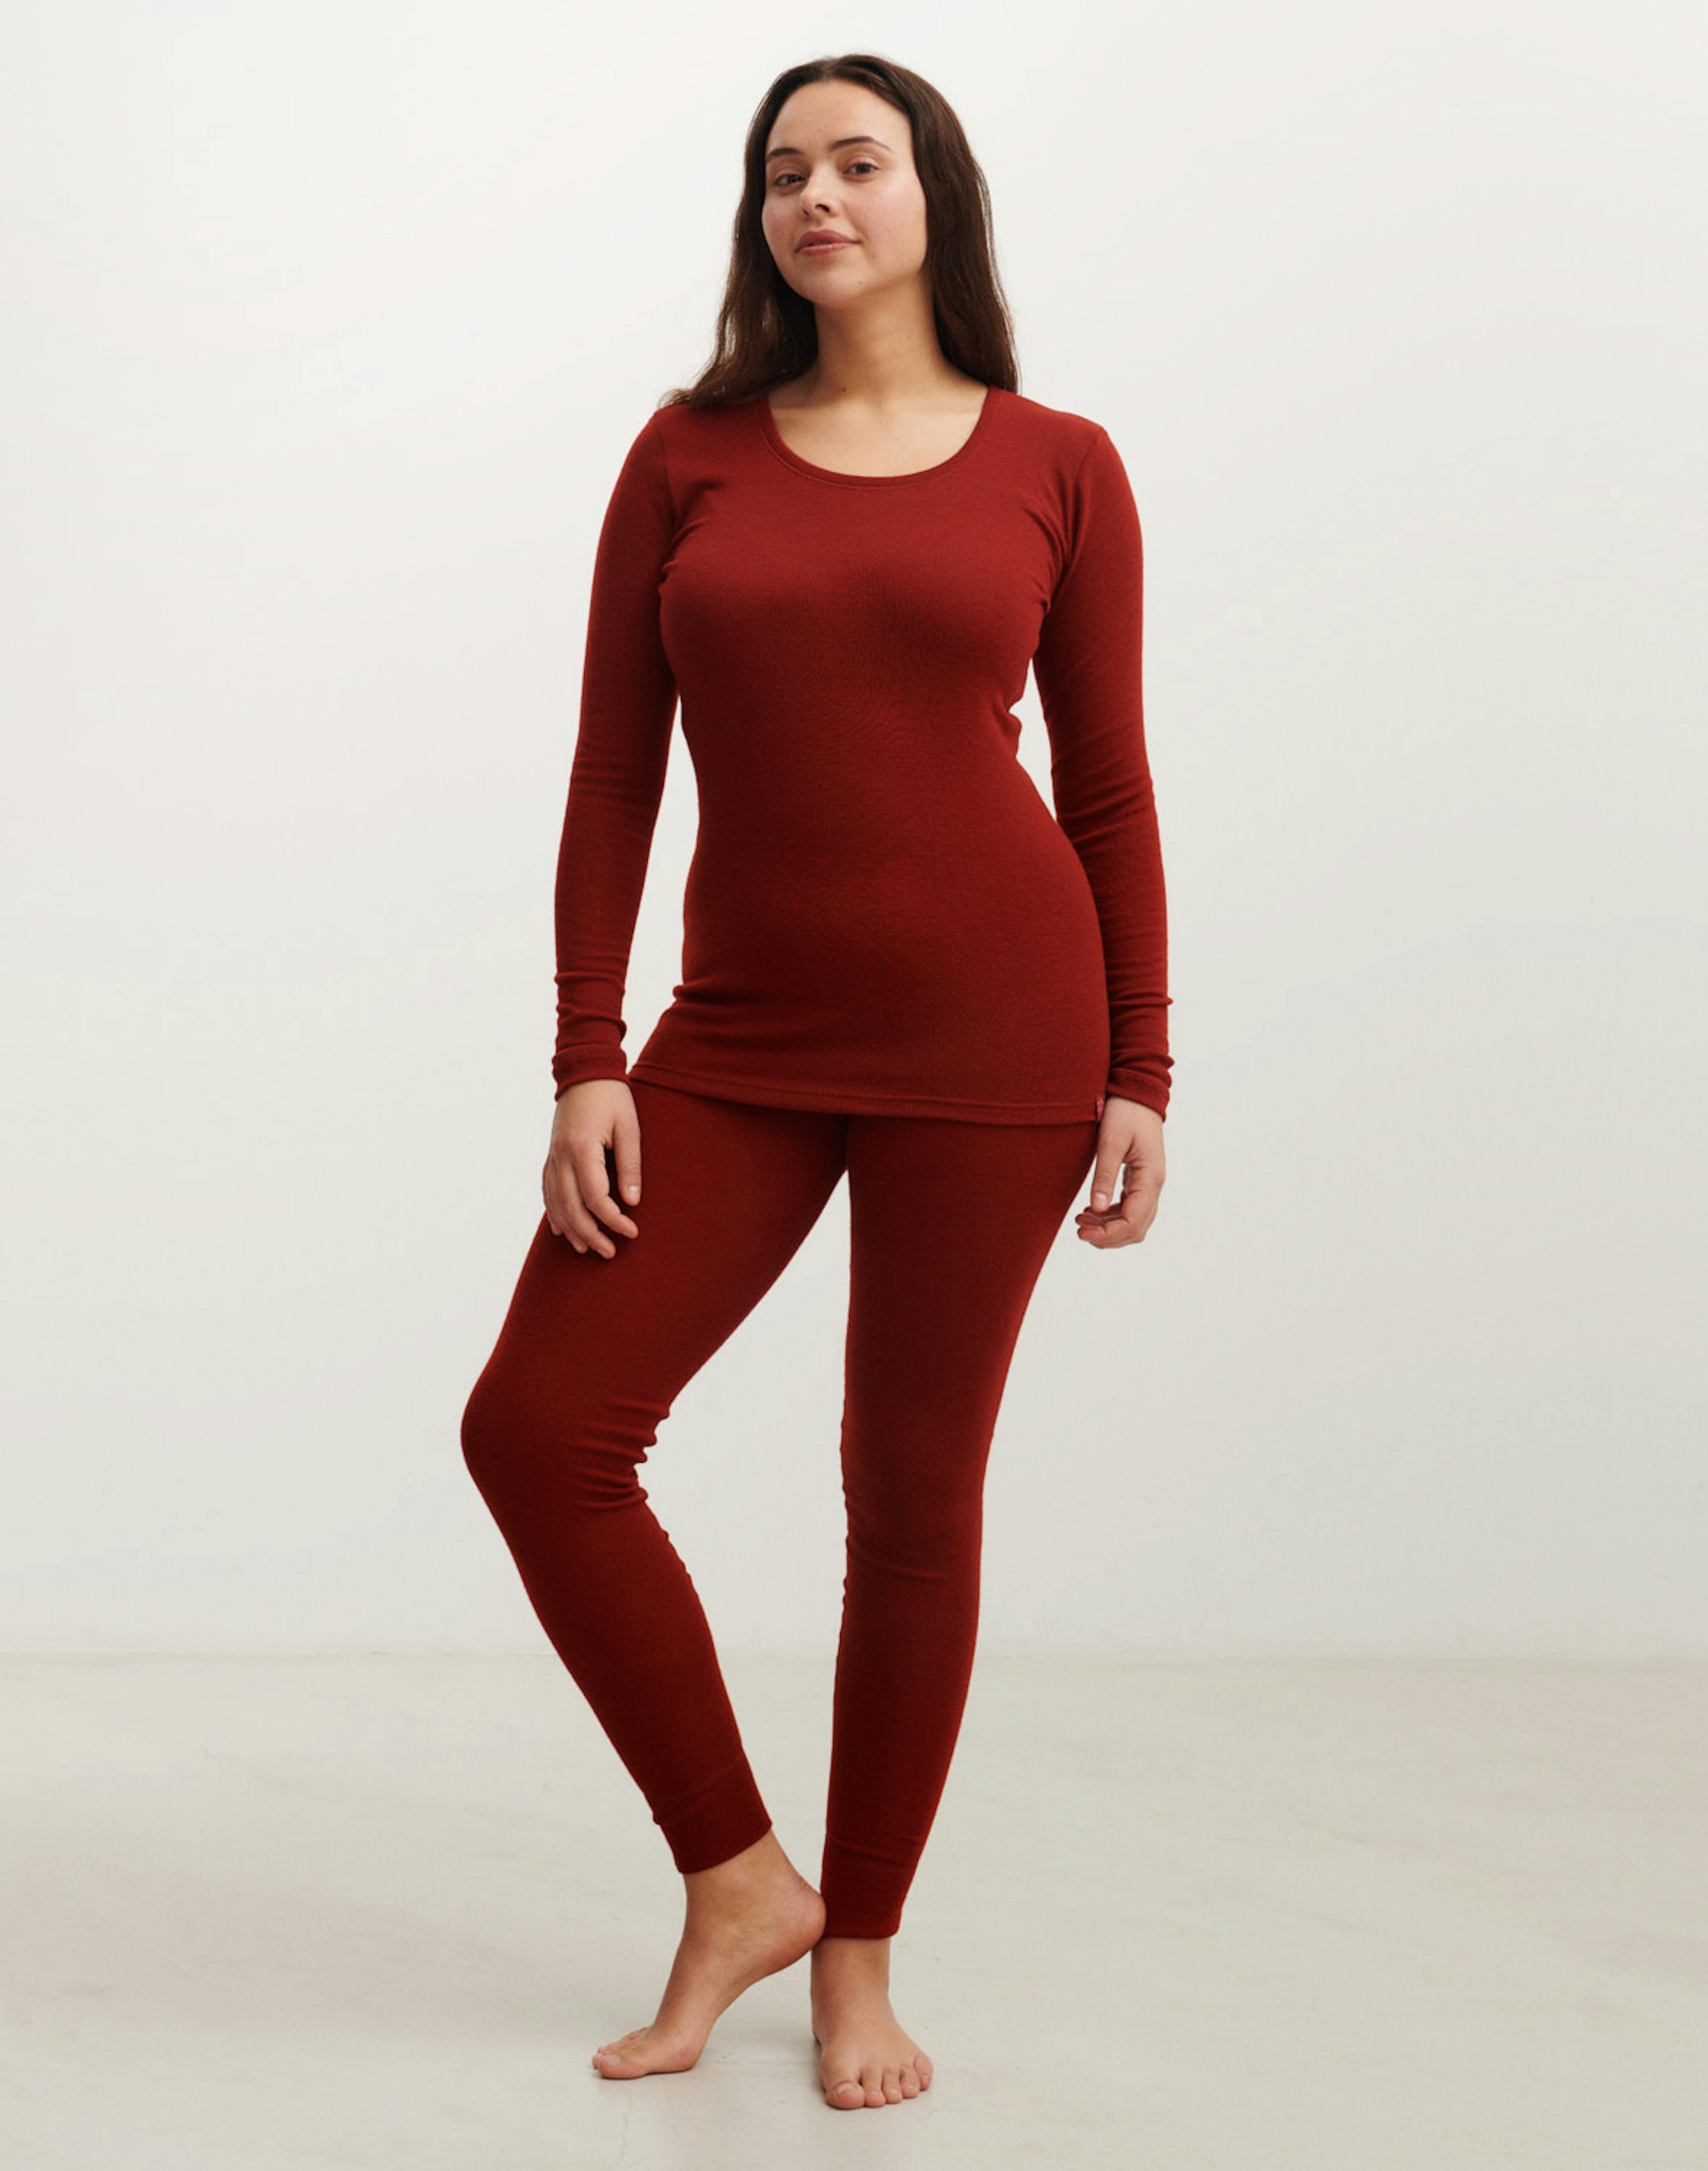 Merino wool leggings for women – soft and exquisite - Dilling